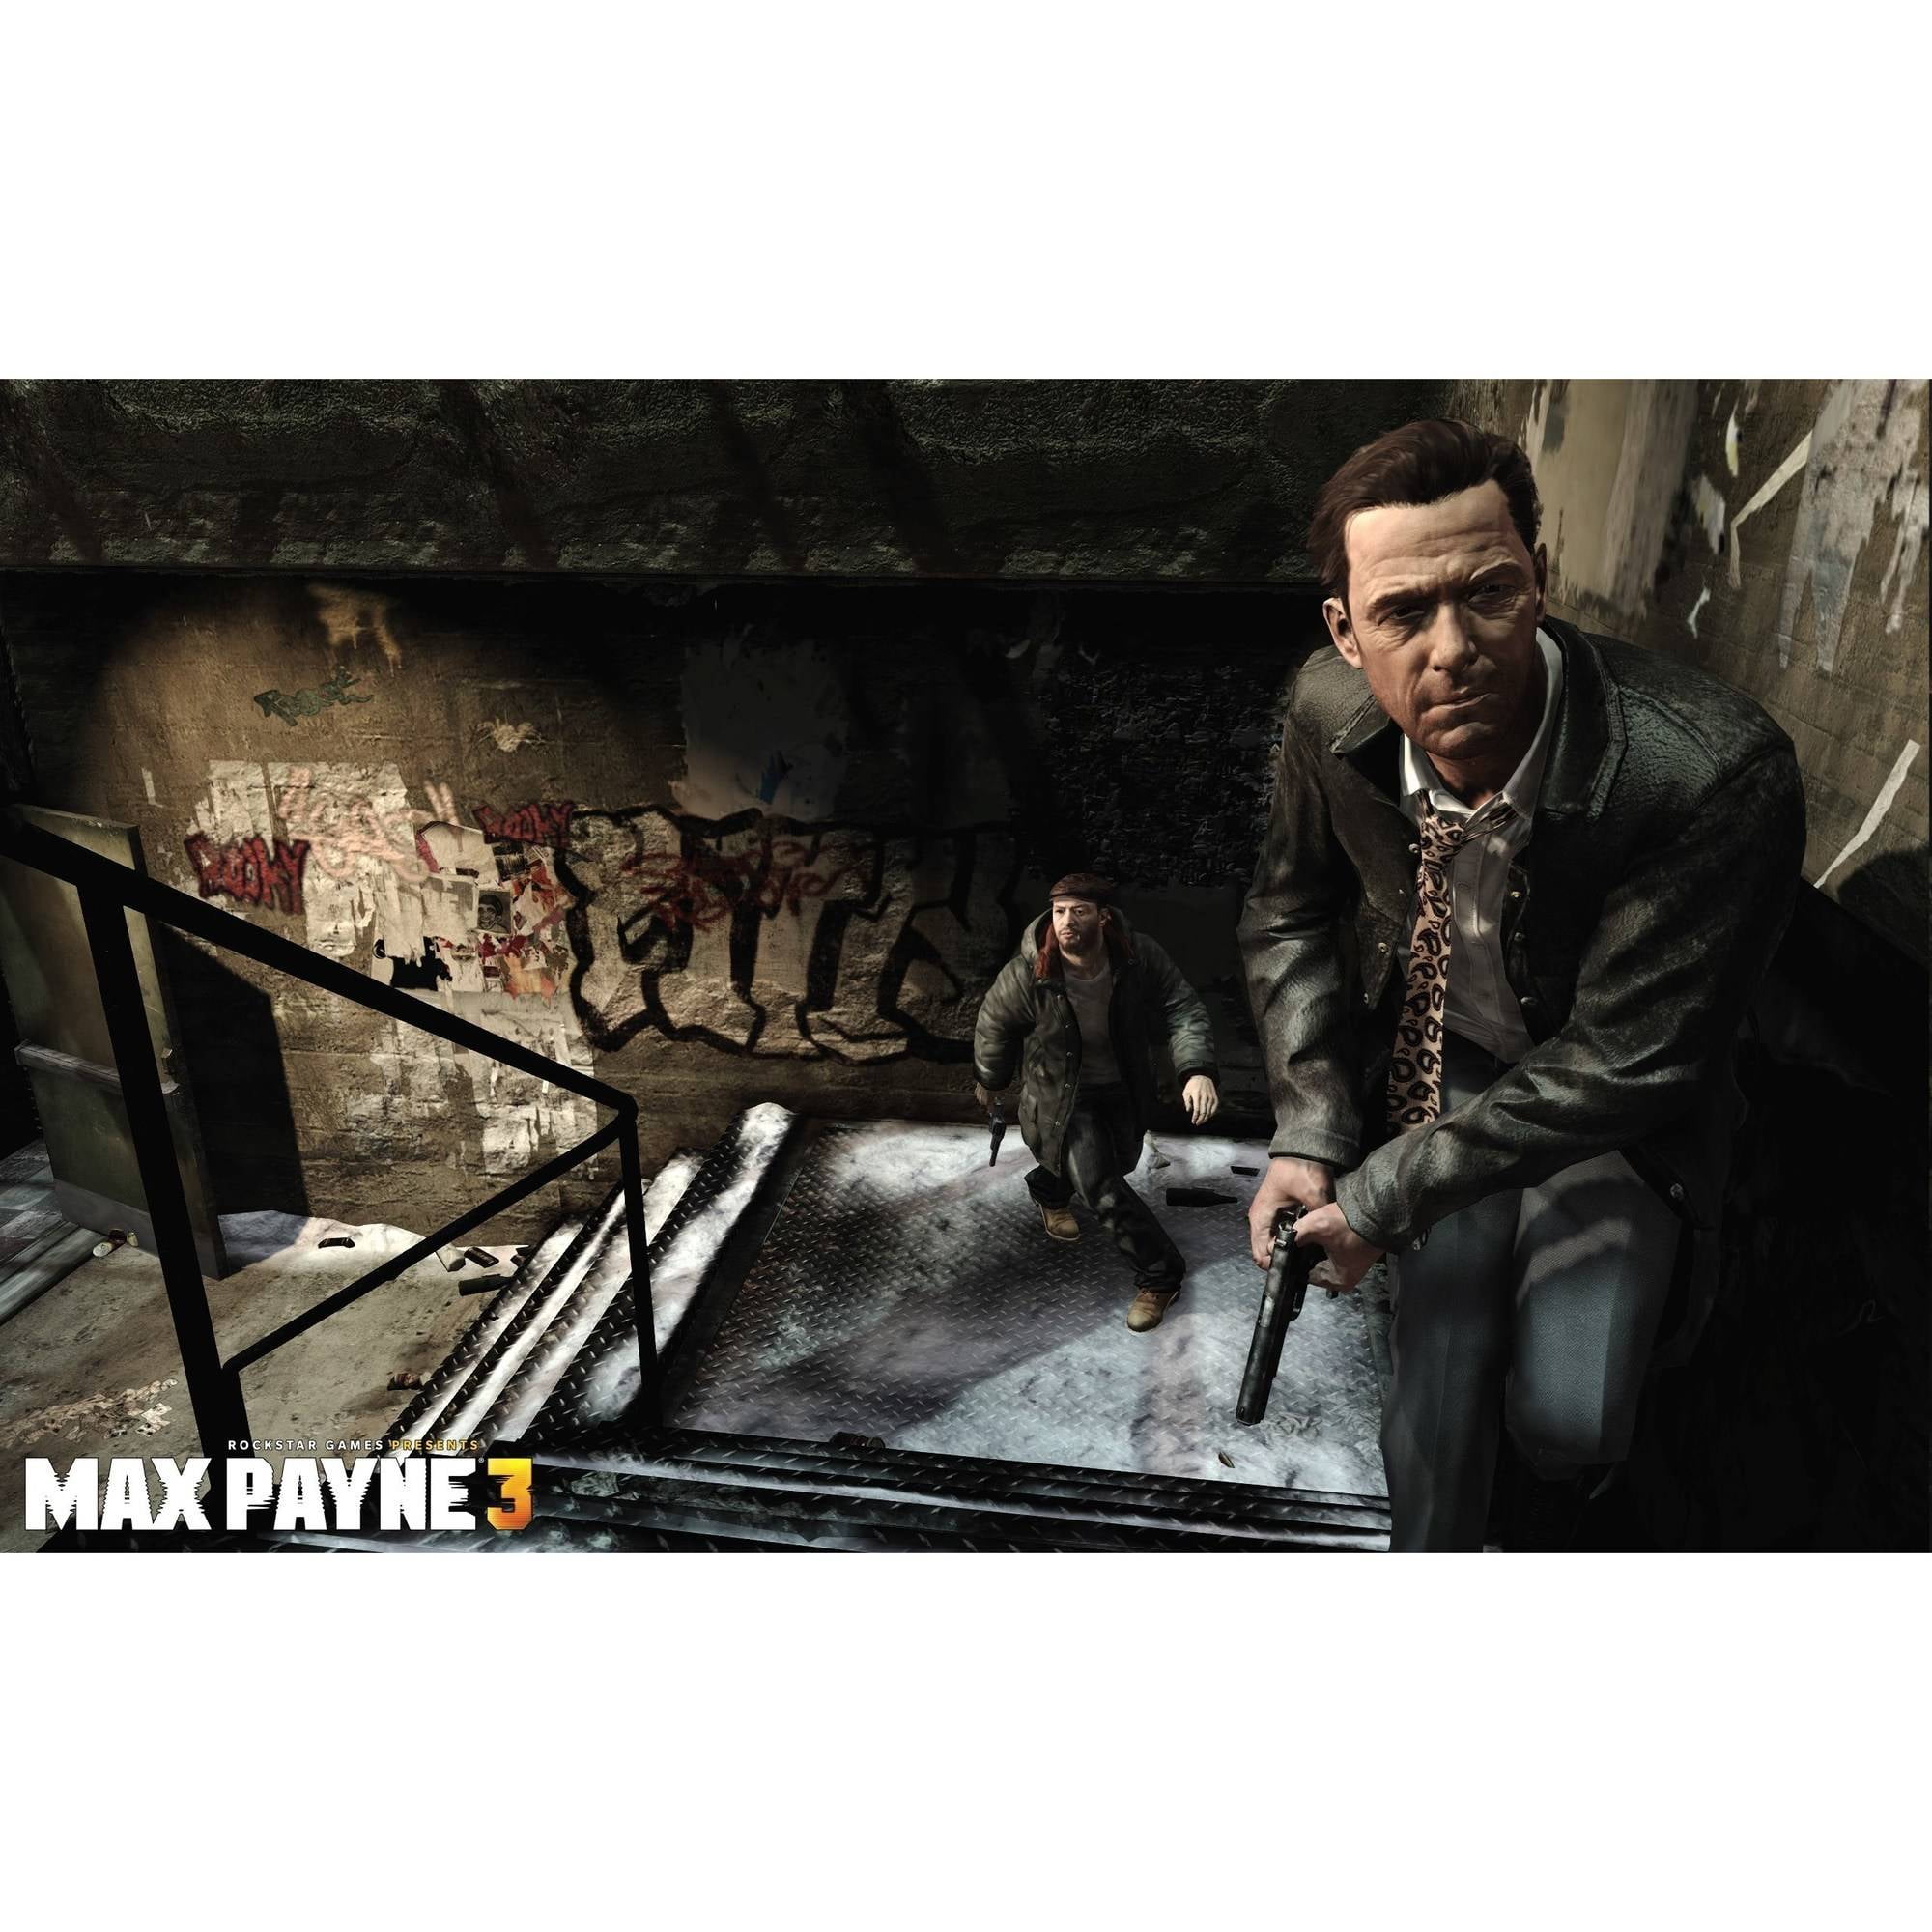 Get Red Dead Redemption for $7.50, Max Payne 3 for $5 right now on